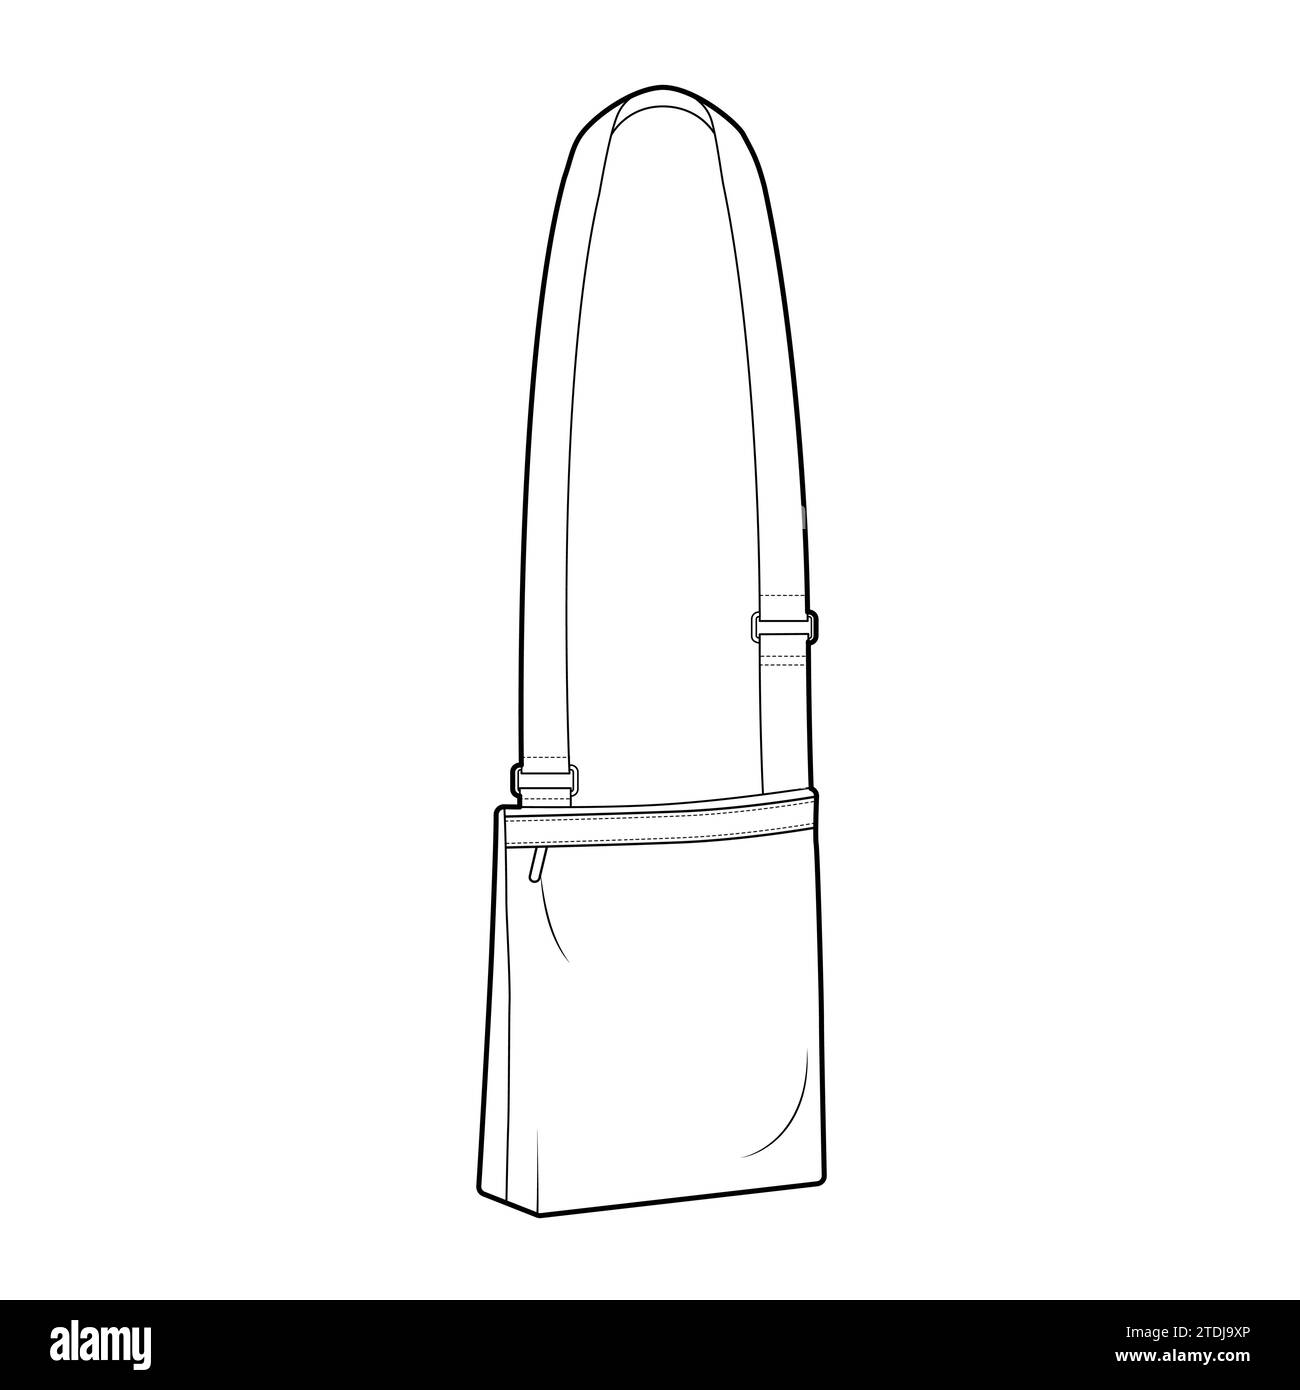 Outdoors Cross-Body Pouch Bag. Fashion accessory technical illustration. Vector satchel front 3-4 view for Men, women, unisex style, flat handbag CAD mockup sketch outline isolated Stock Vector